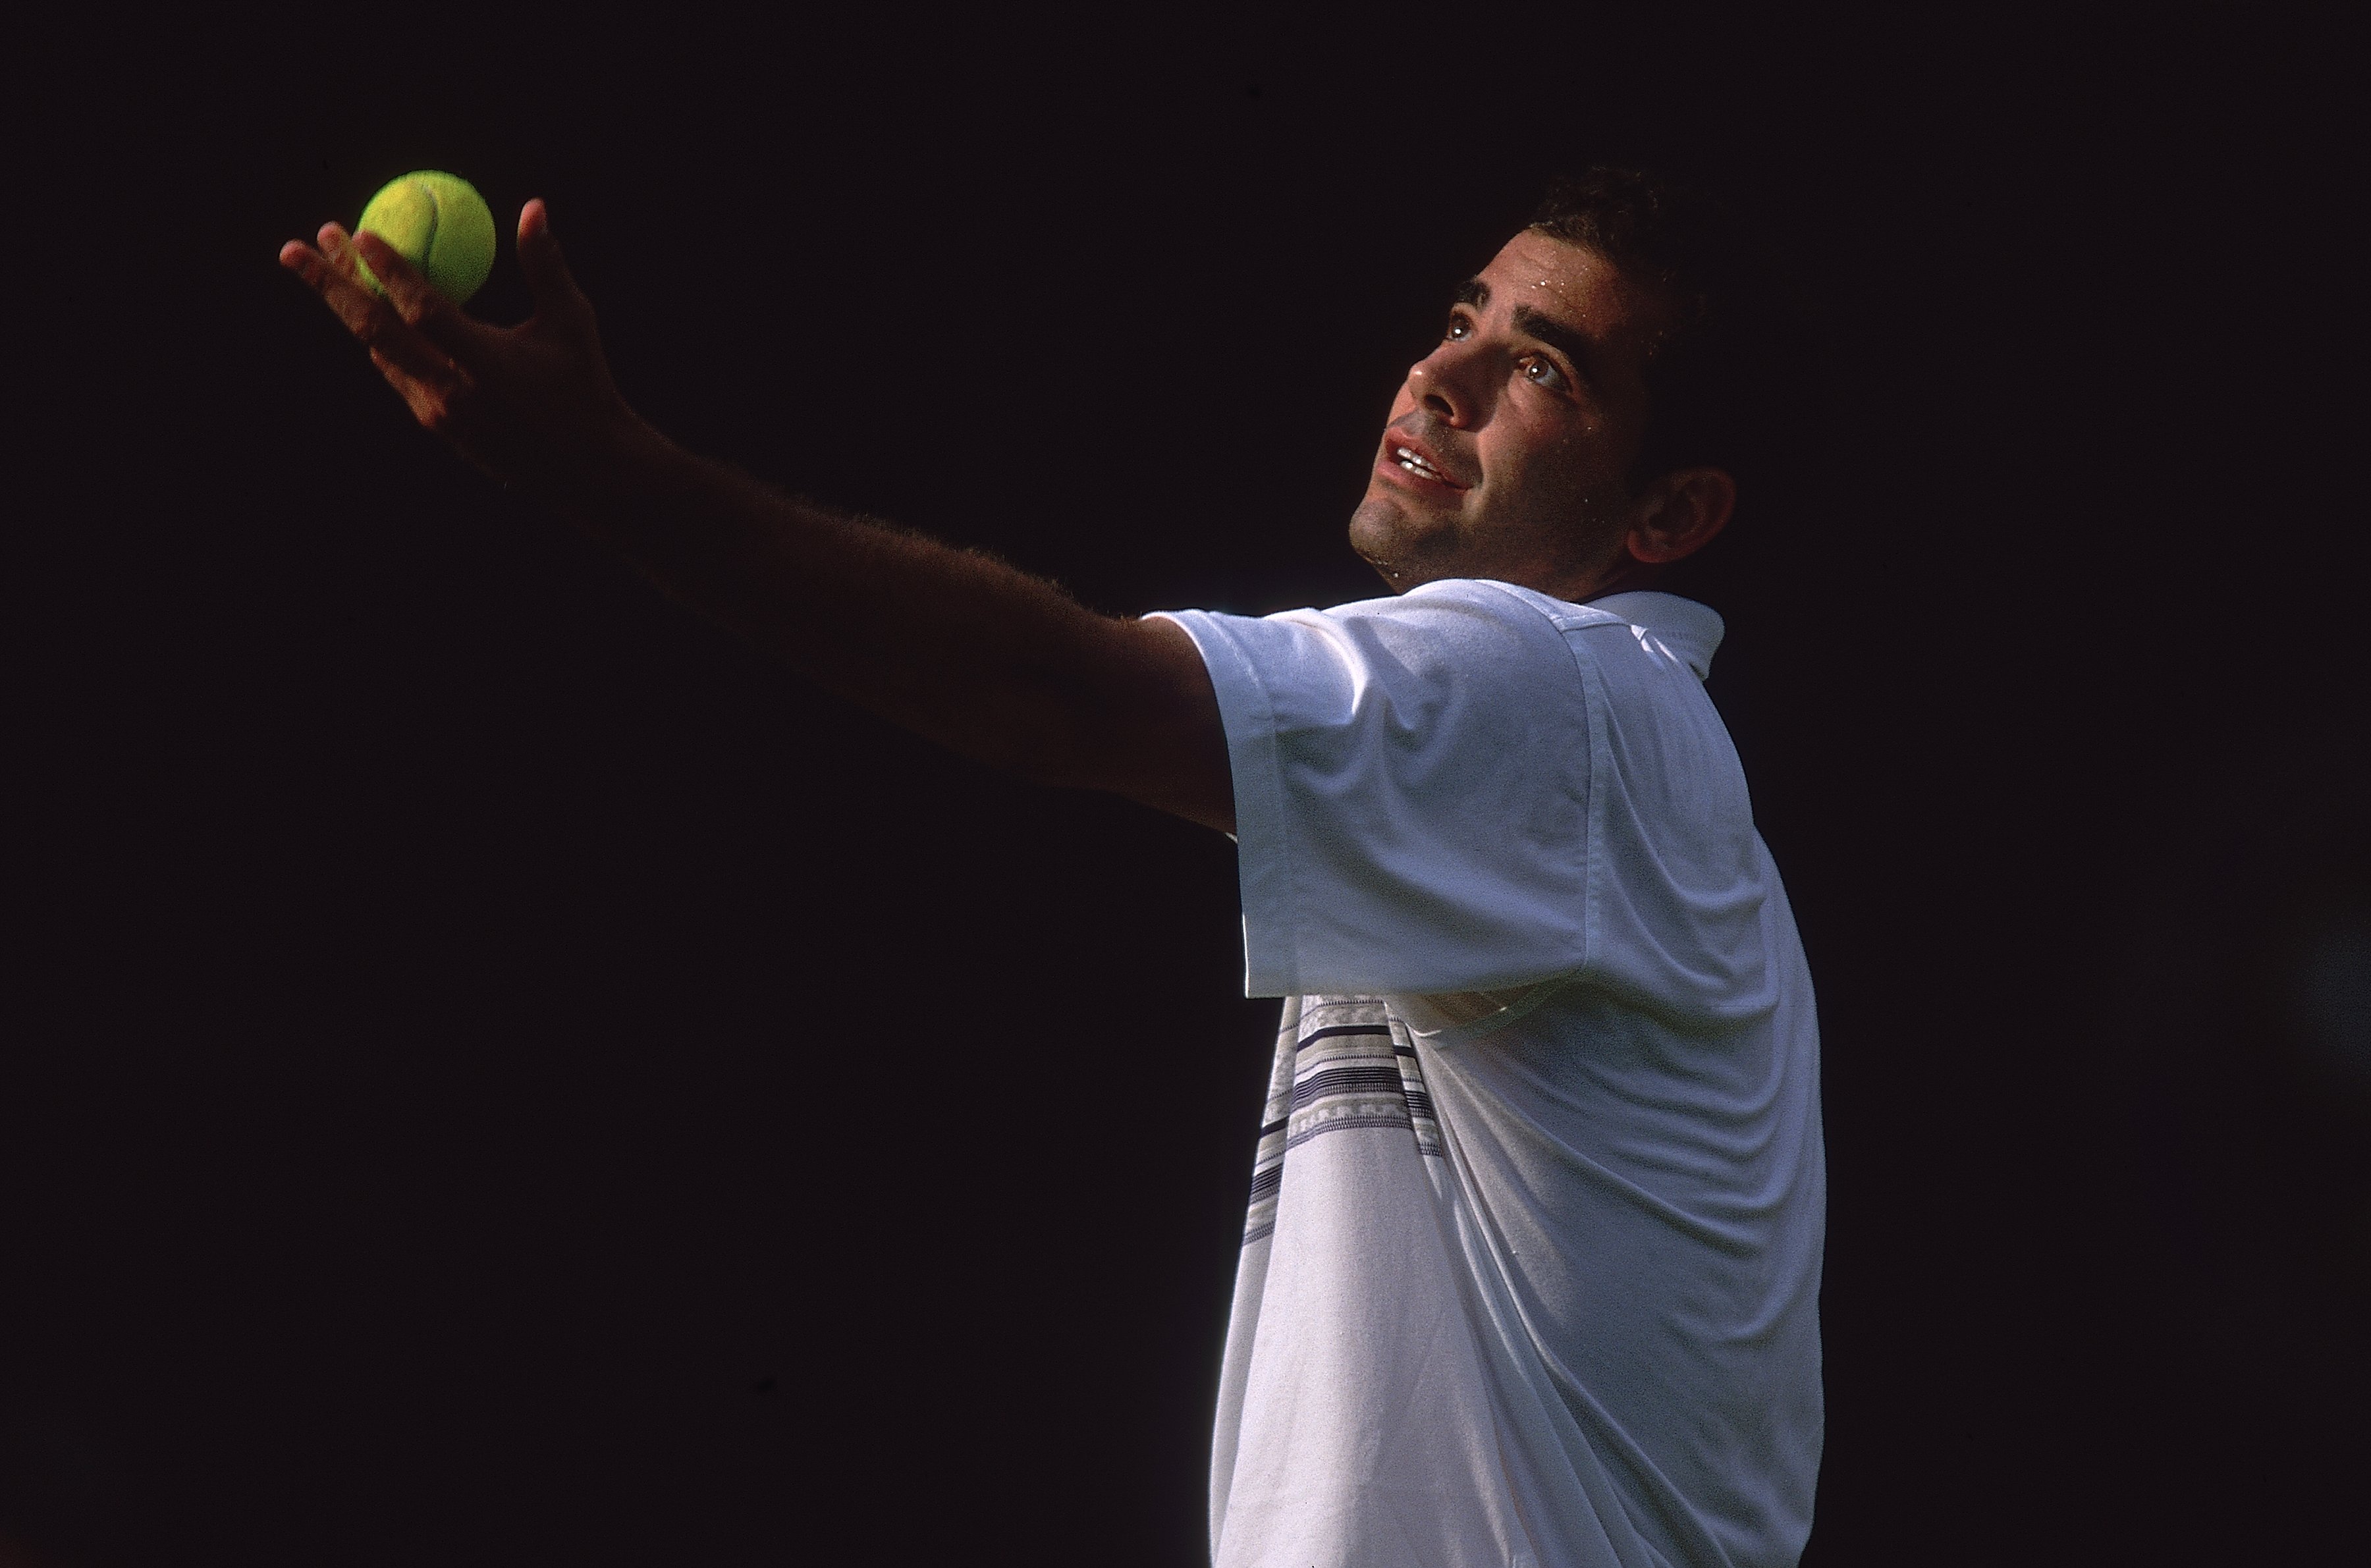 27 Jun 2001:  Pete Sampras of the USA prepares to serve during the second round of the Wimbledon Lawn Tennis Championship held at the All England Lawn Tennis and Croquet Club, in Wimbledon, London. \ Mandatory Credit: Gary M Prior/Allsport